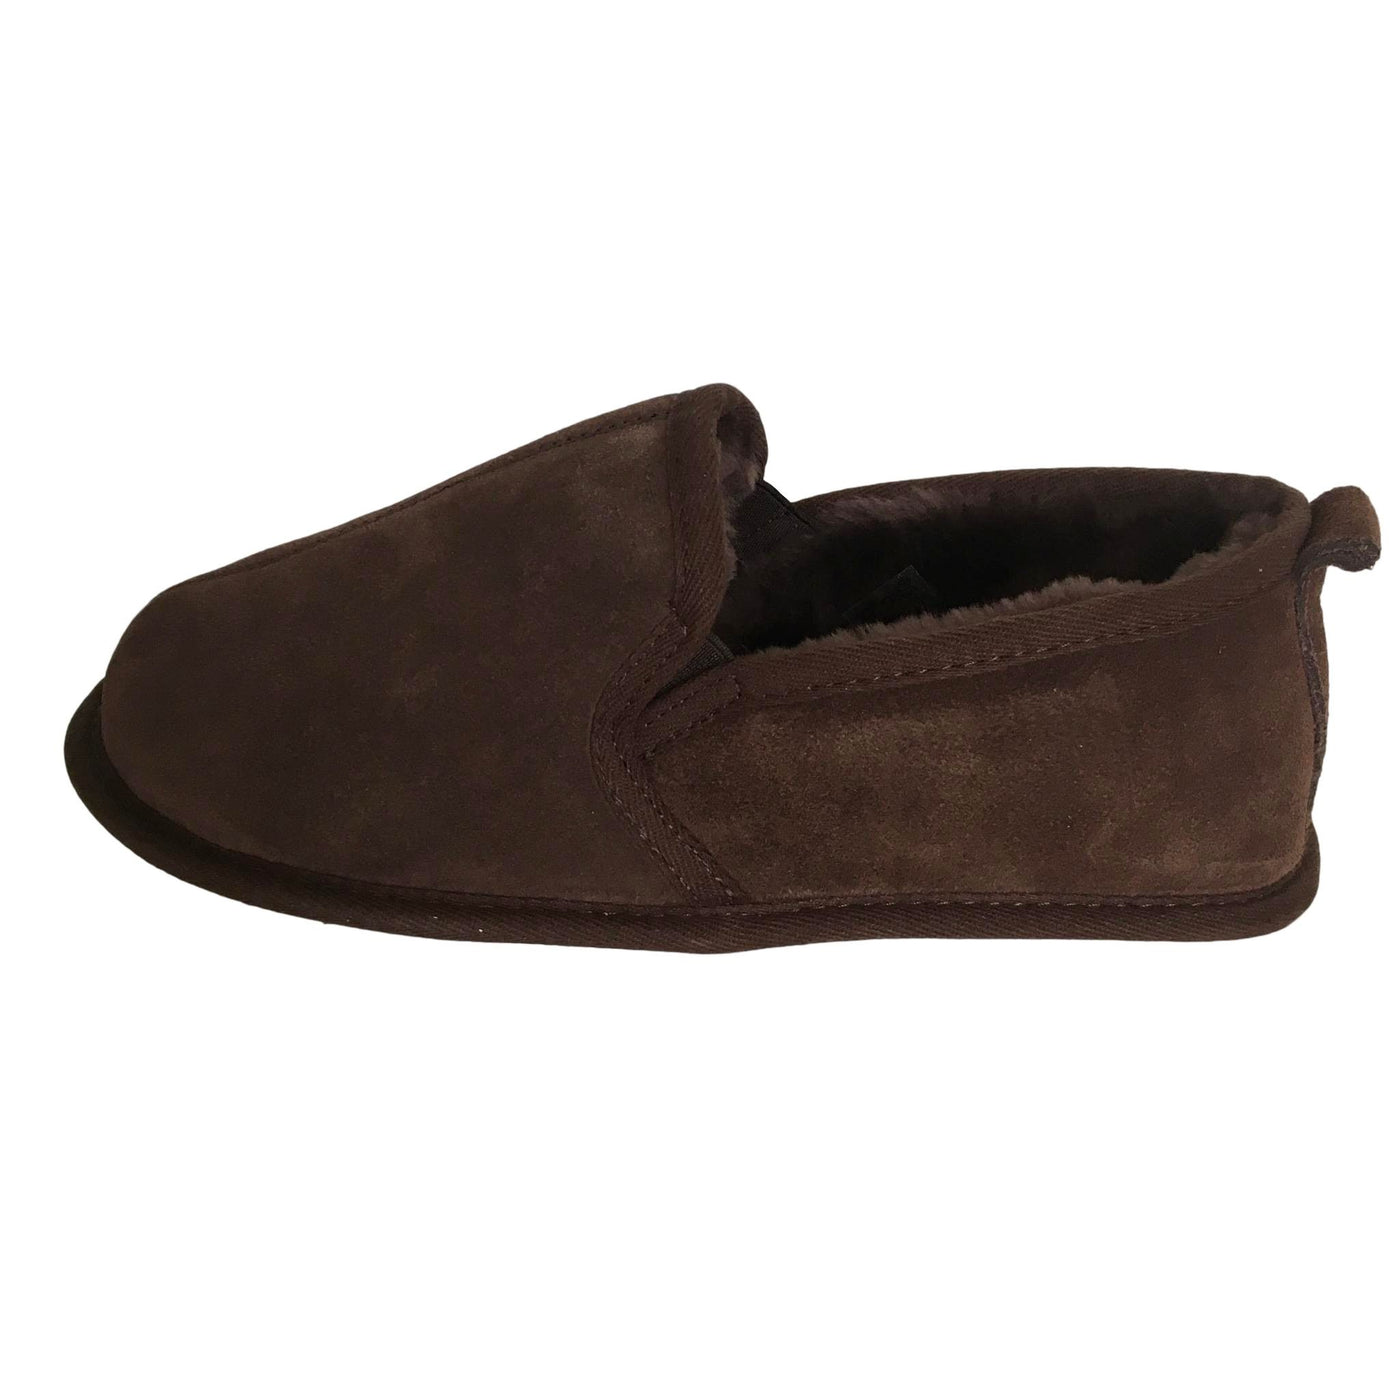 Deluxe Mens 'Liam' Sheepskin Slippers with Soft Sole - Chocolate ...